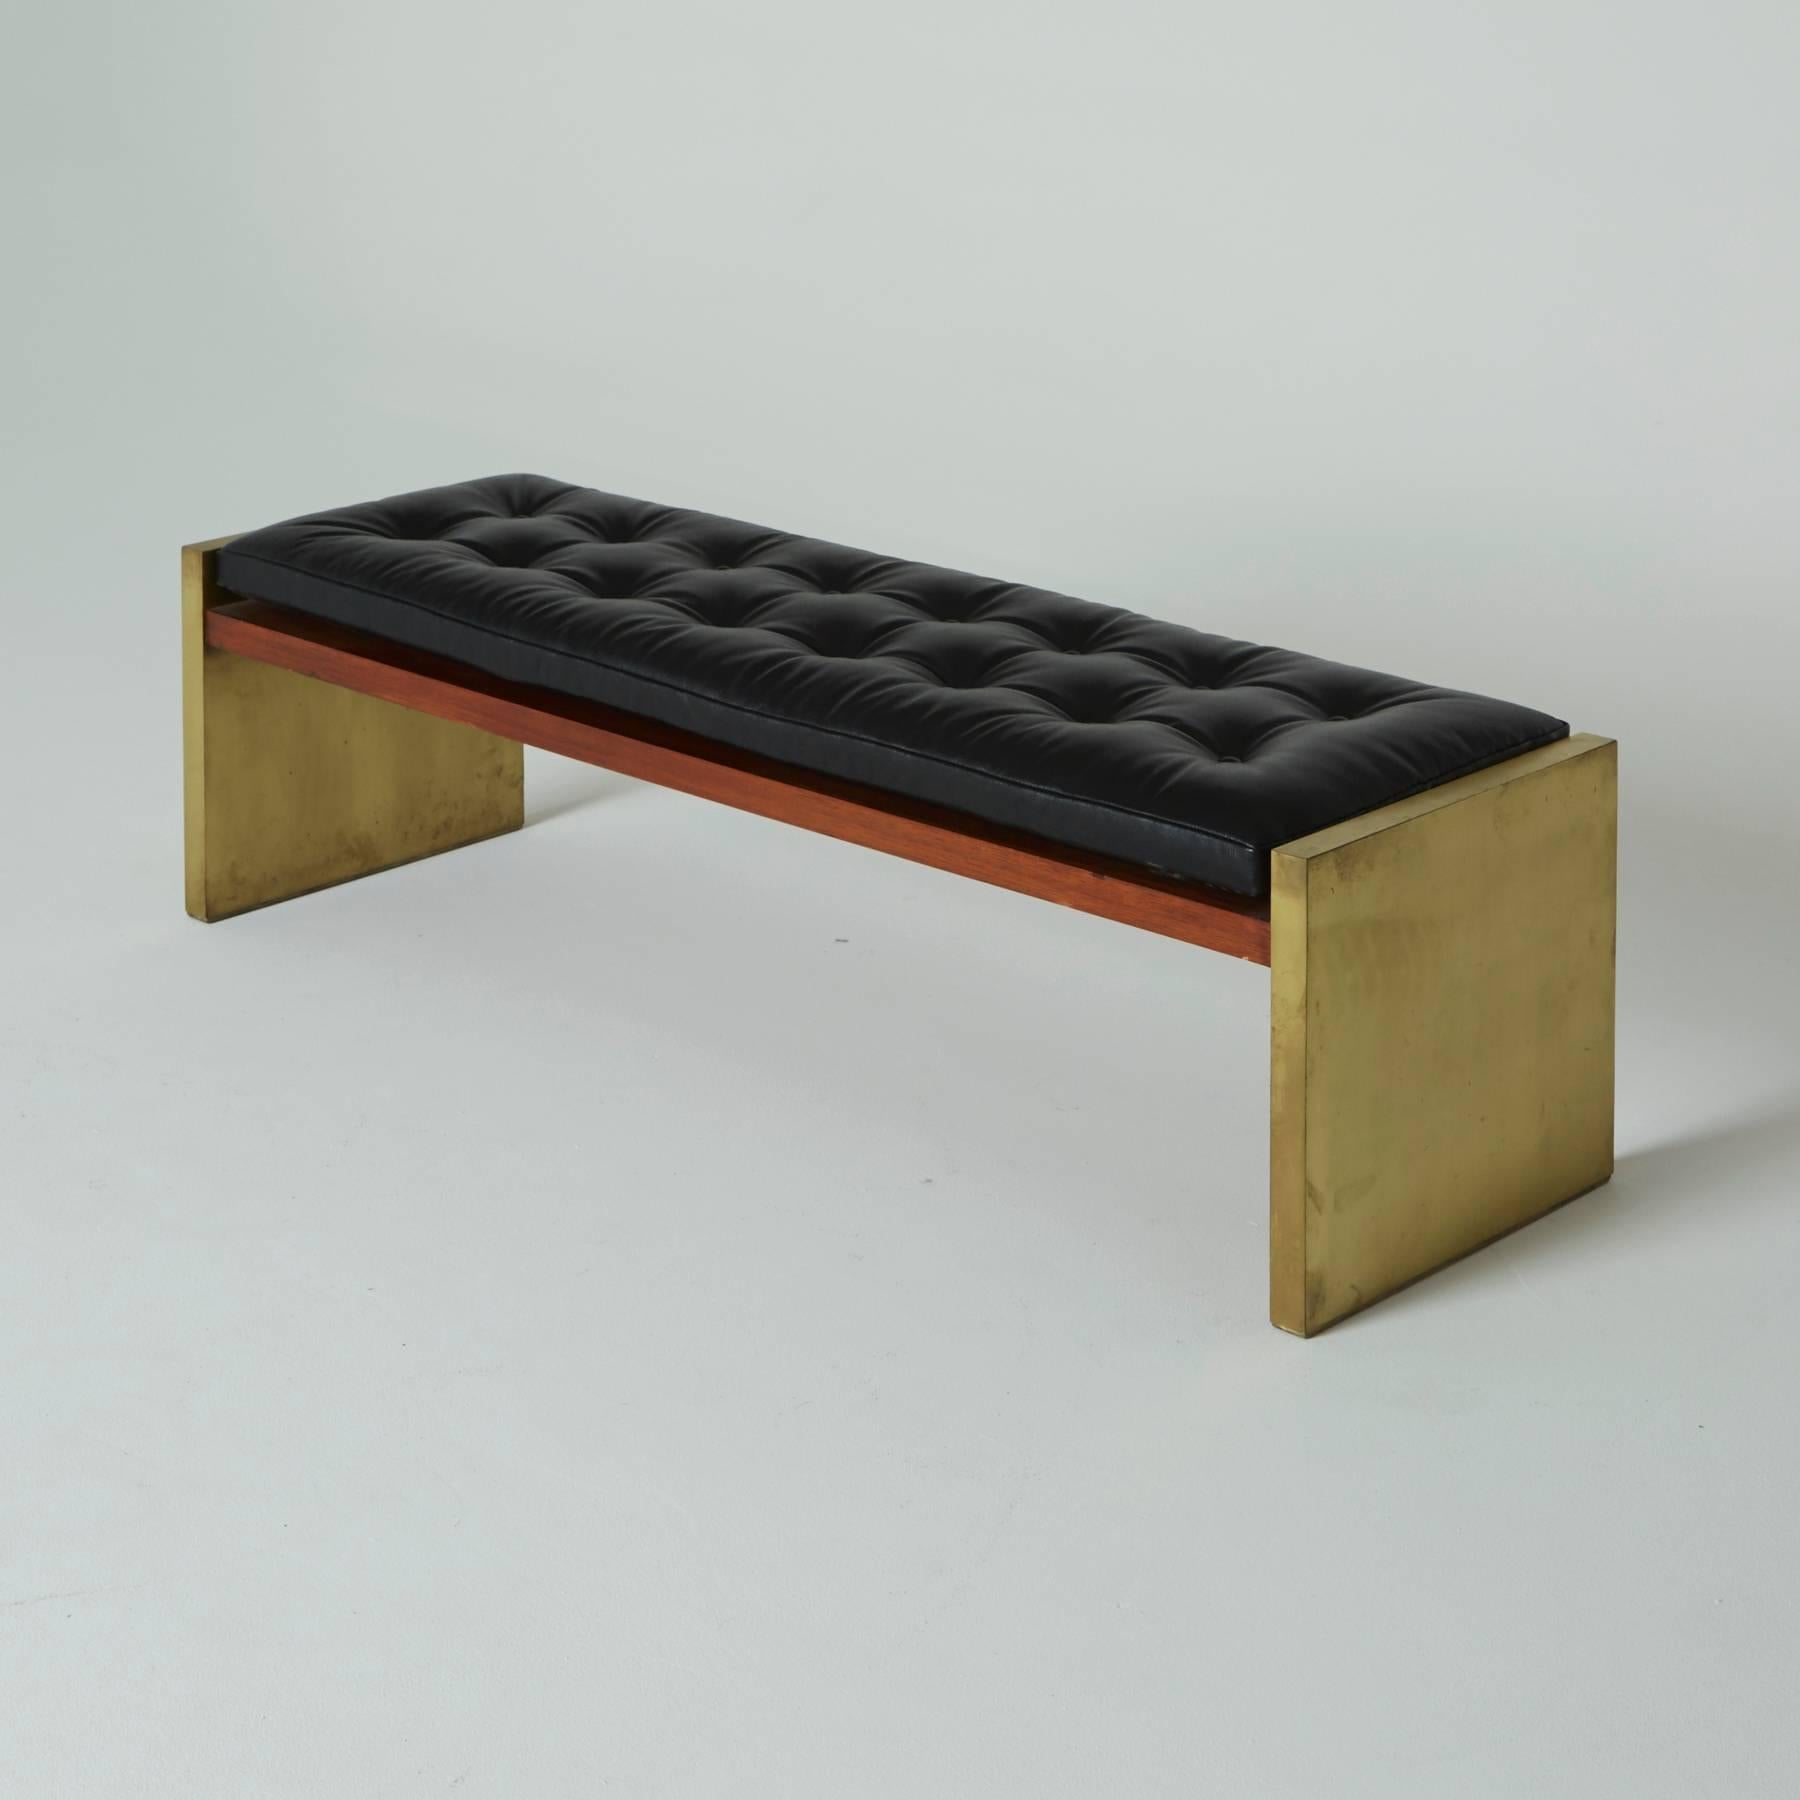 Rarely constructed with a brass frame, this Roger Sprunger window bench is a truly coveted gem. Large enough to comfortably seat three or one for an afternoon nap.

Sitting atop the rosewood bench is a black leather cushion by Edelman.